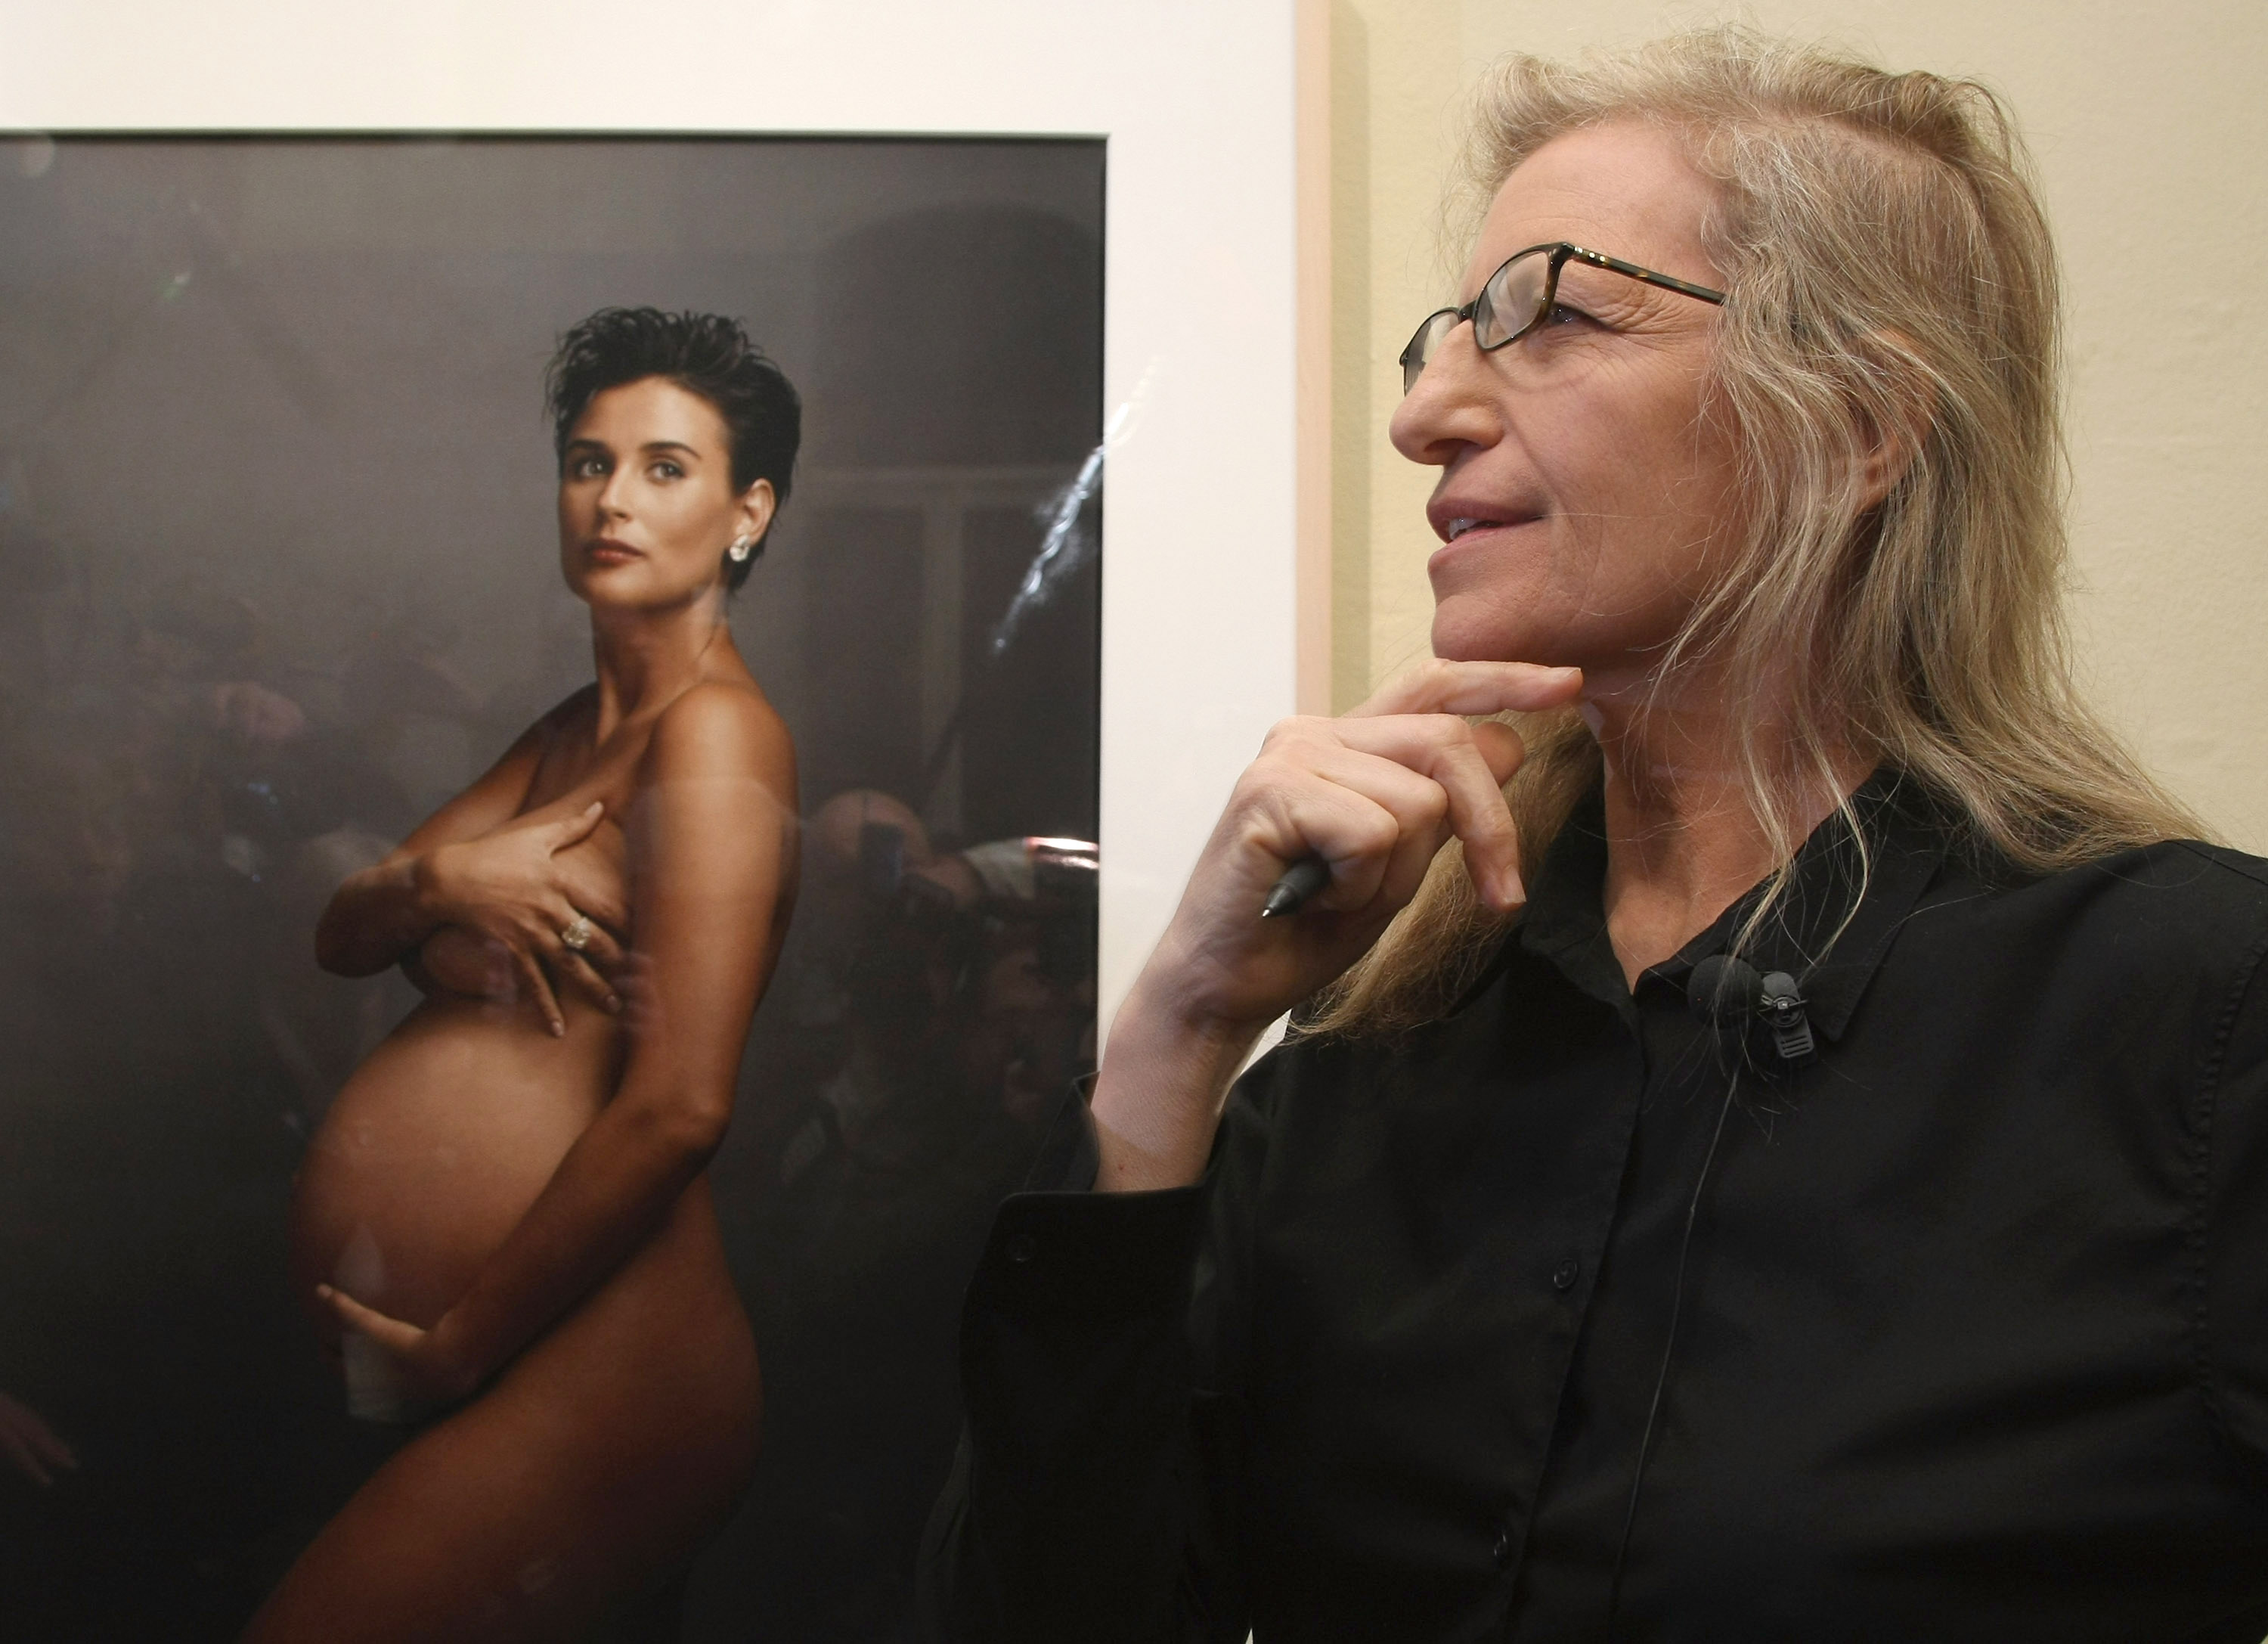 Annie Leibovitz stands in front of a portrait of pregnant actress Demi Moore during a walk-through of the exhibition "Annie Leibovitz - A Photographer's Life 1990-2005" at the C/O Gallery on February 20, 2009, in Berlin, Germany. | Source: Getty Images